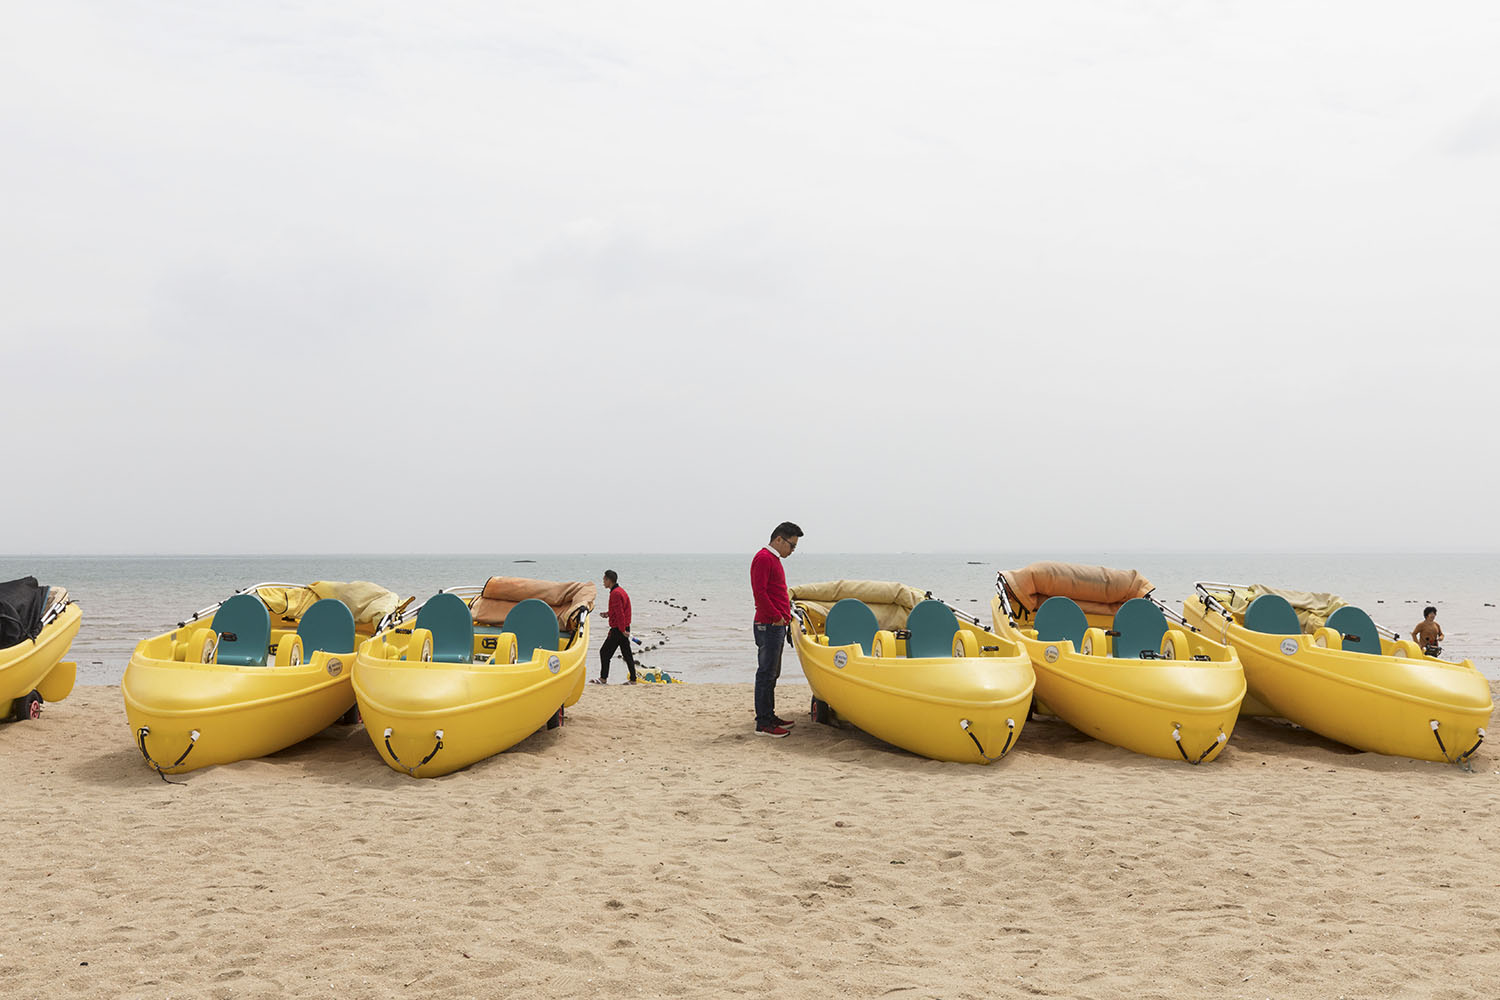 Small boats for tourists and beach goers at Guanyinshan Fantasy Beach. Xiamen, China. 2018.